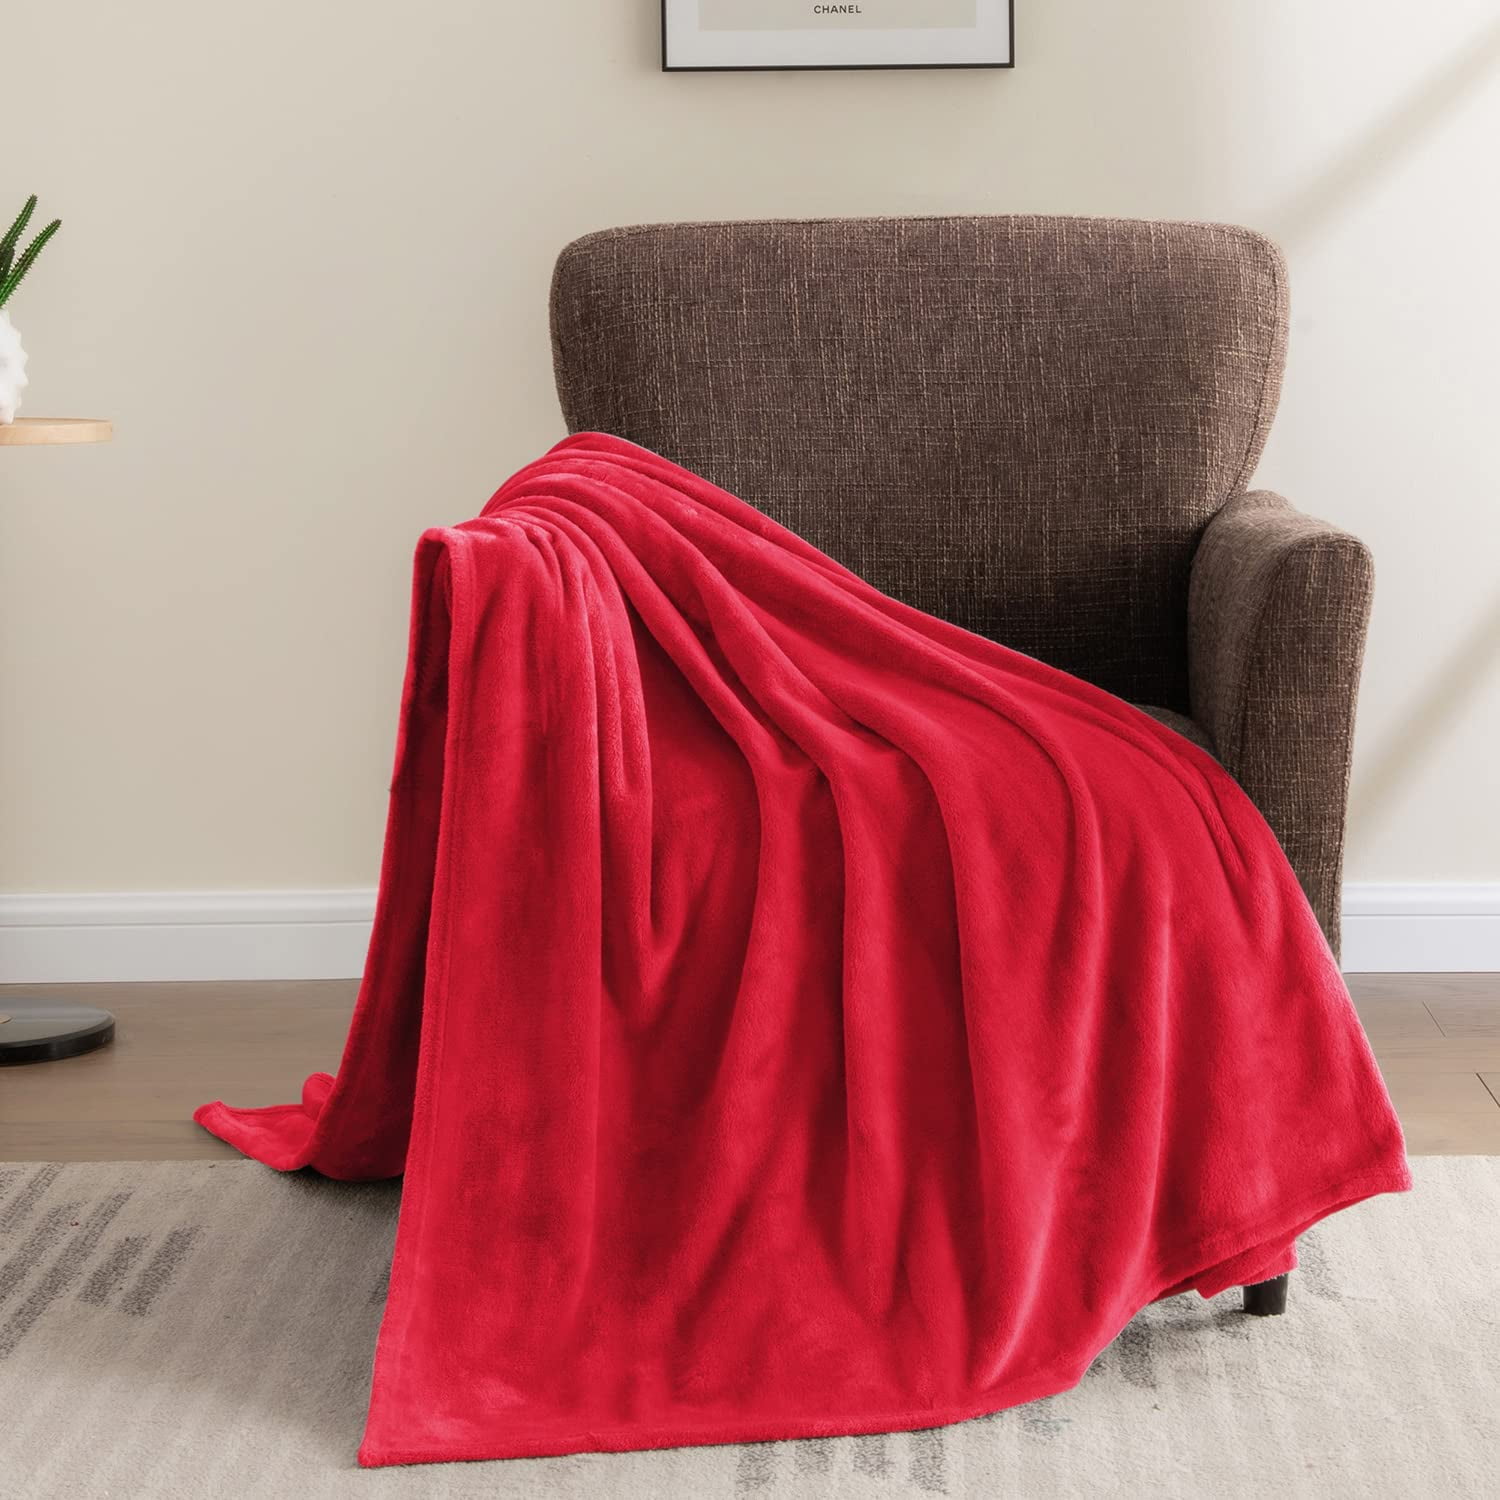 BEDELITE Fleece Blanket Red Throw Blanket for Couch & Bed, Plush Cozy Fuzzy  Blanket 50 x 60, Super Soft & Warm Blankets for Fall and Winter Red  50x60 